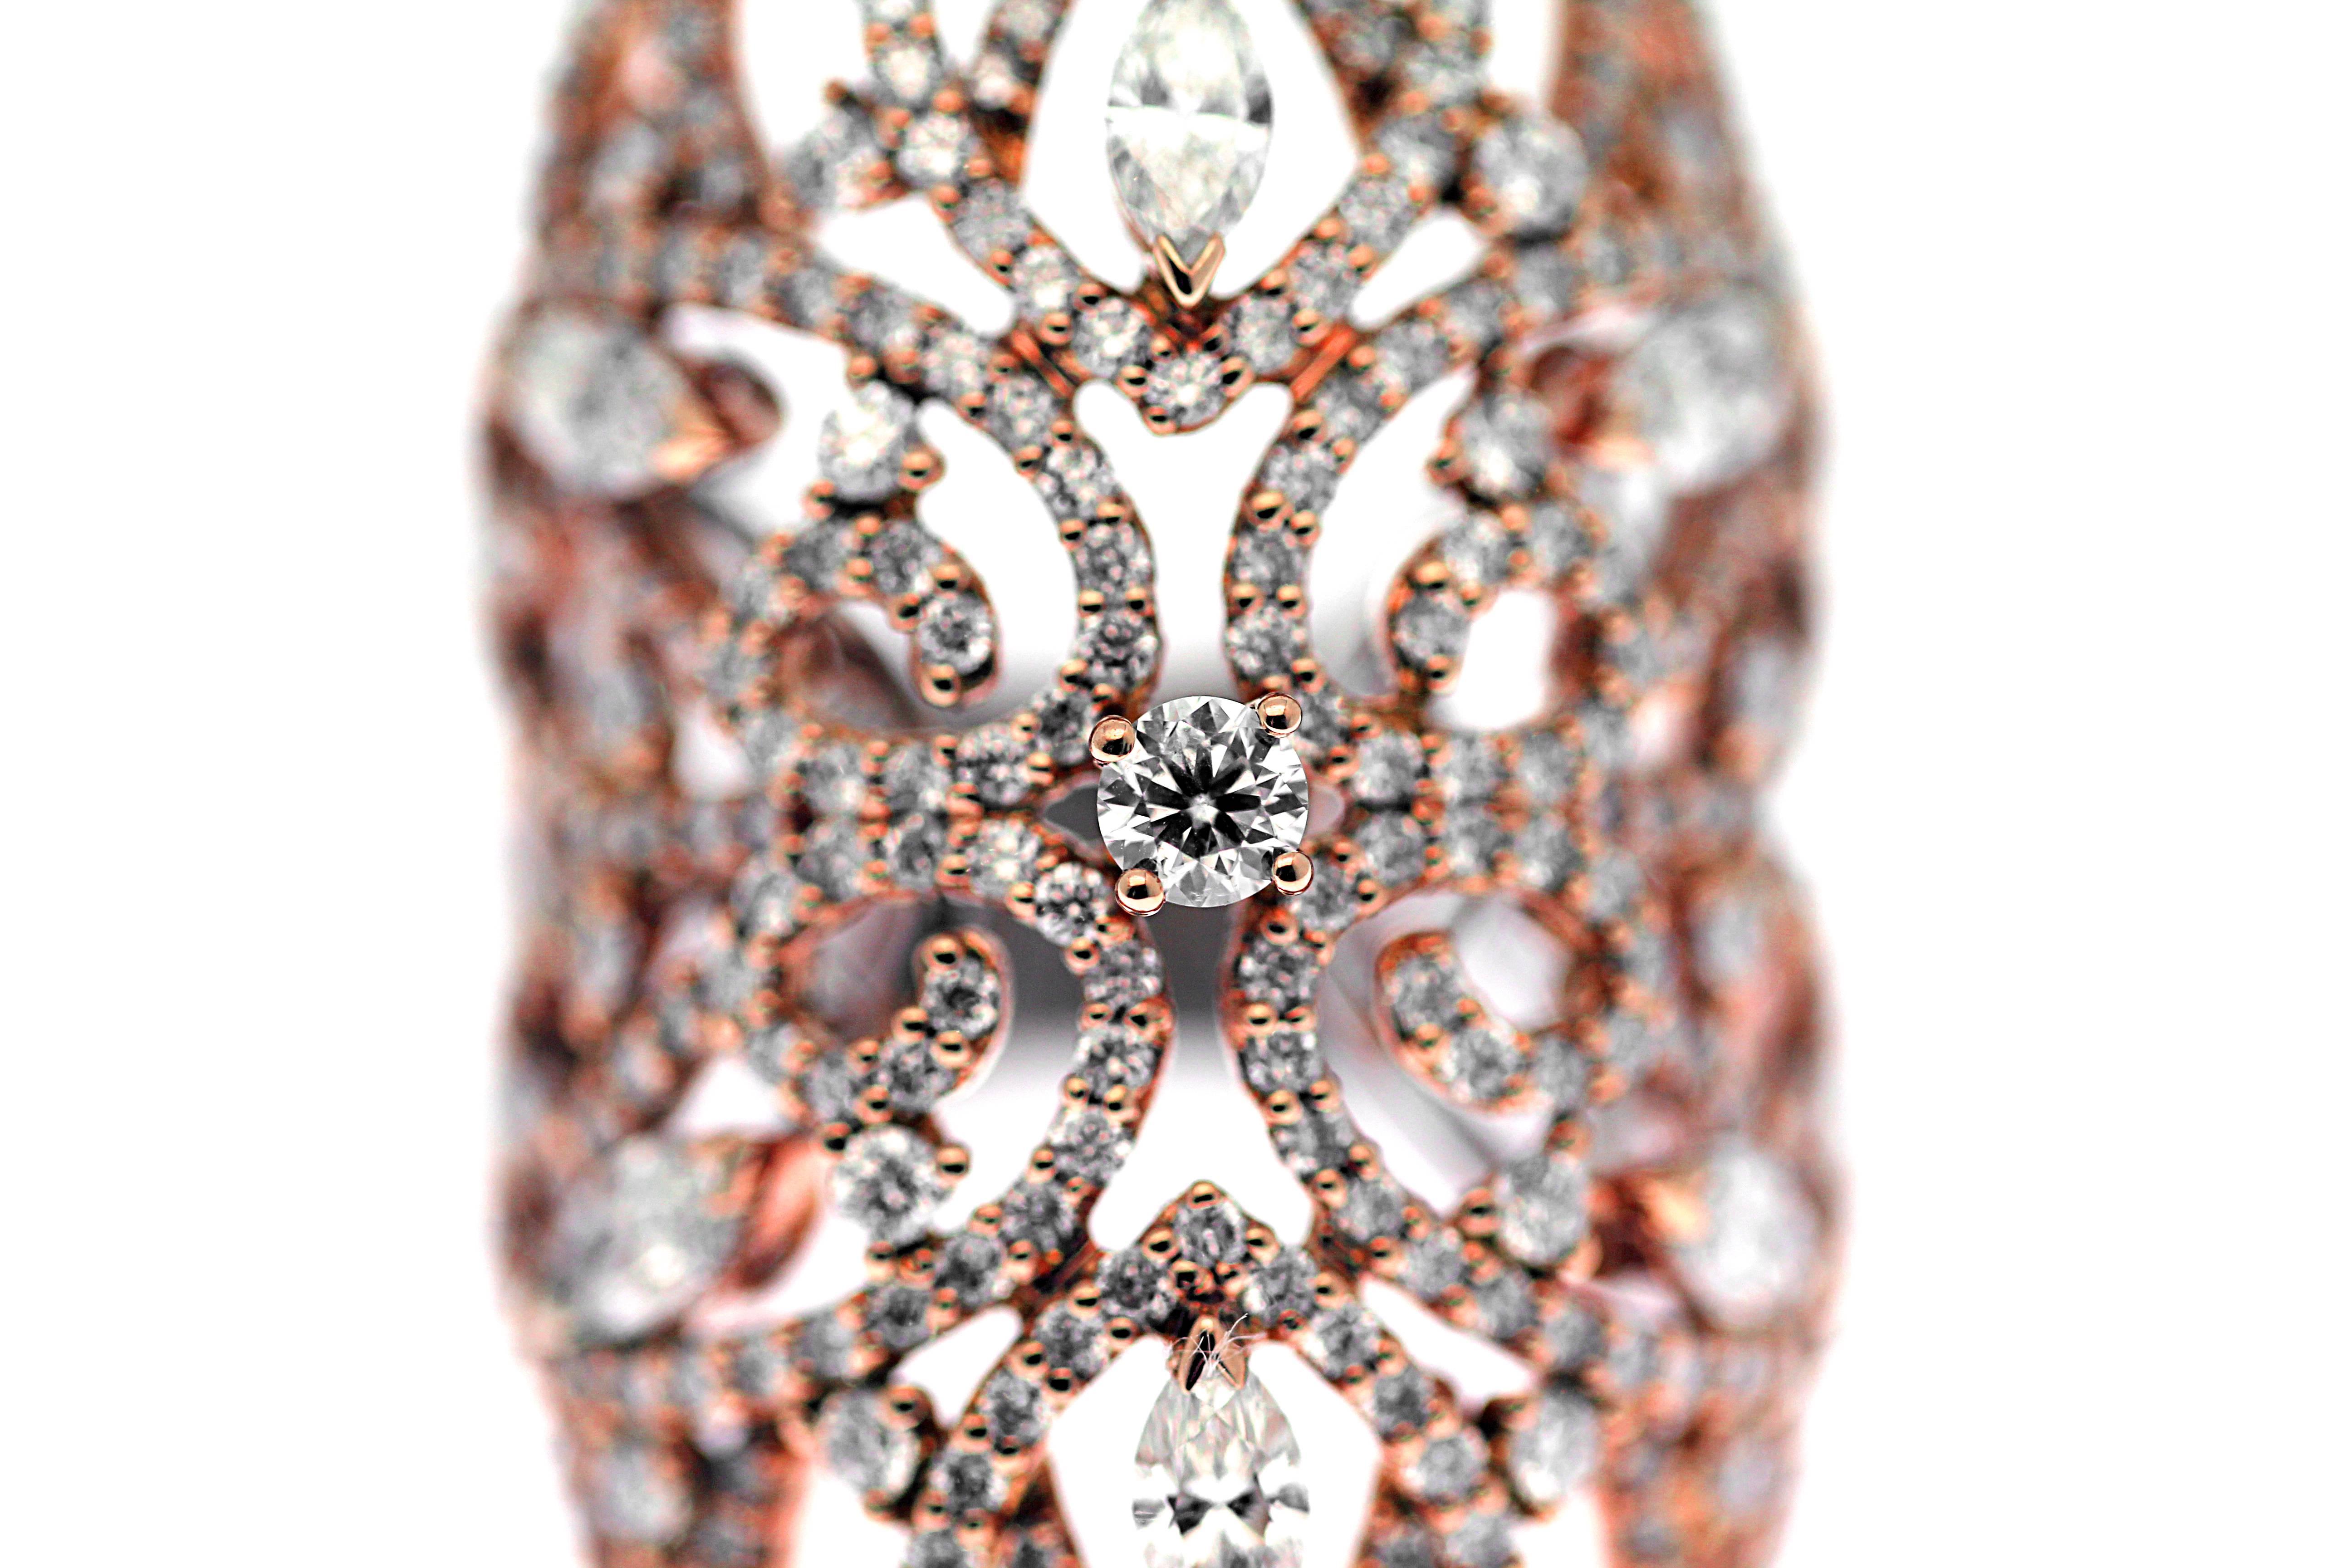 Exquisite 18kt rose gold lace ring.
Set with 3.50ct of pure white brilliant and marquise cut diamonds to add an extra fancy touch.
Very comfortable to wear,  as the back is specially crafted to not be thick and heavy.